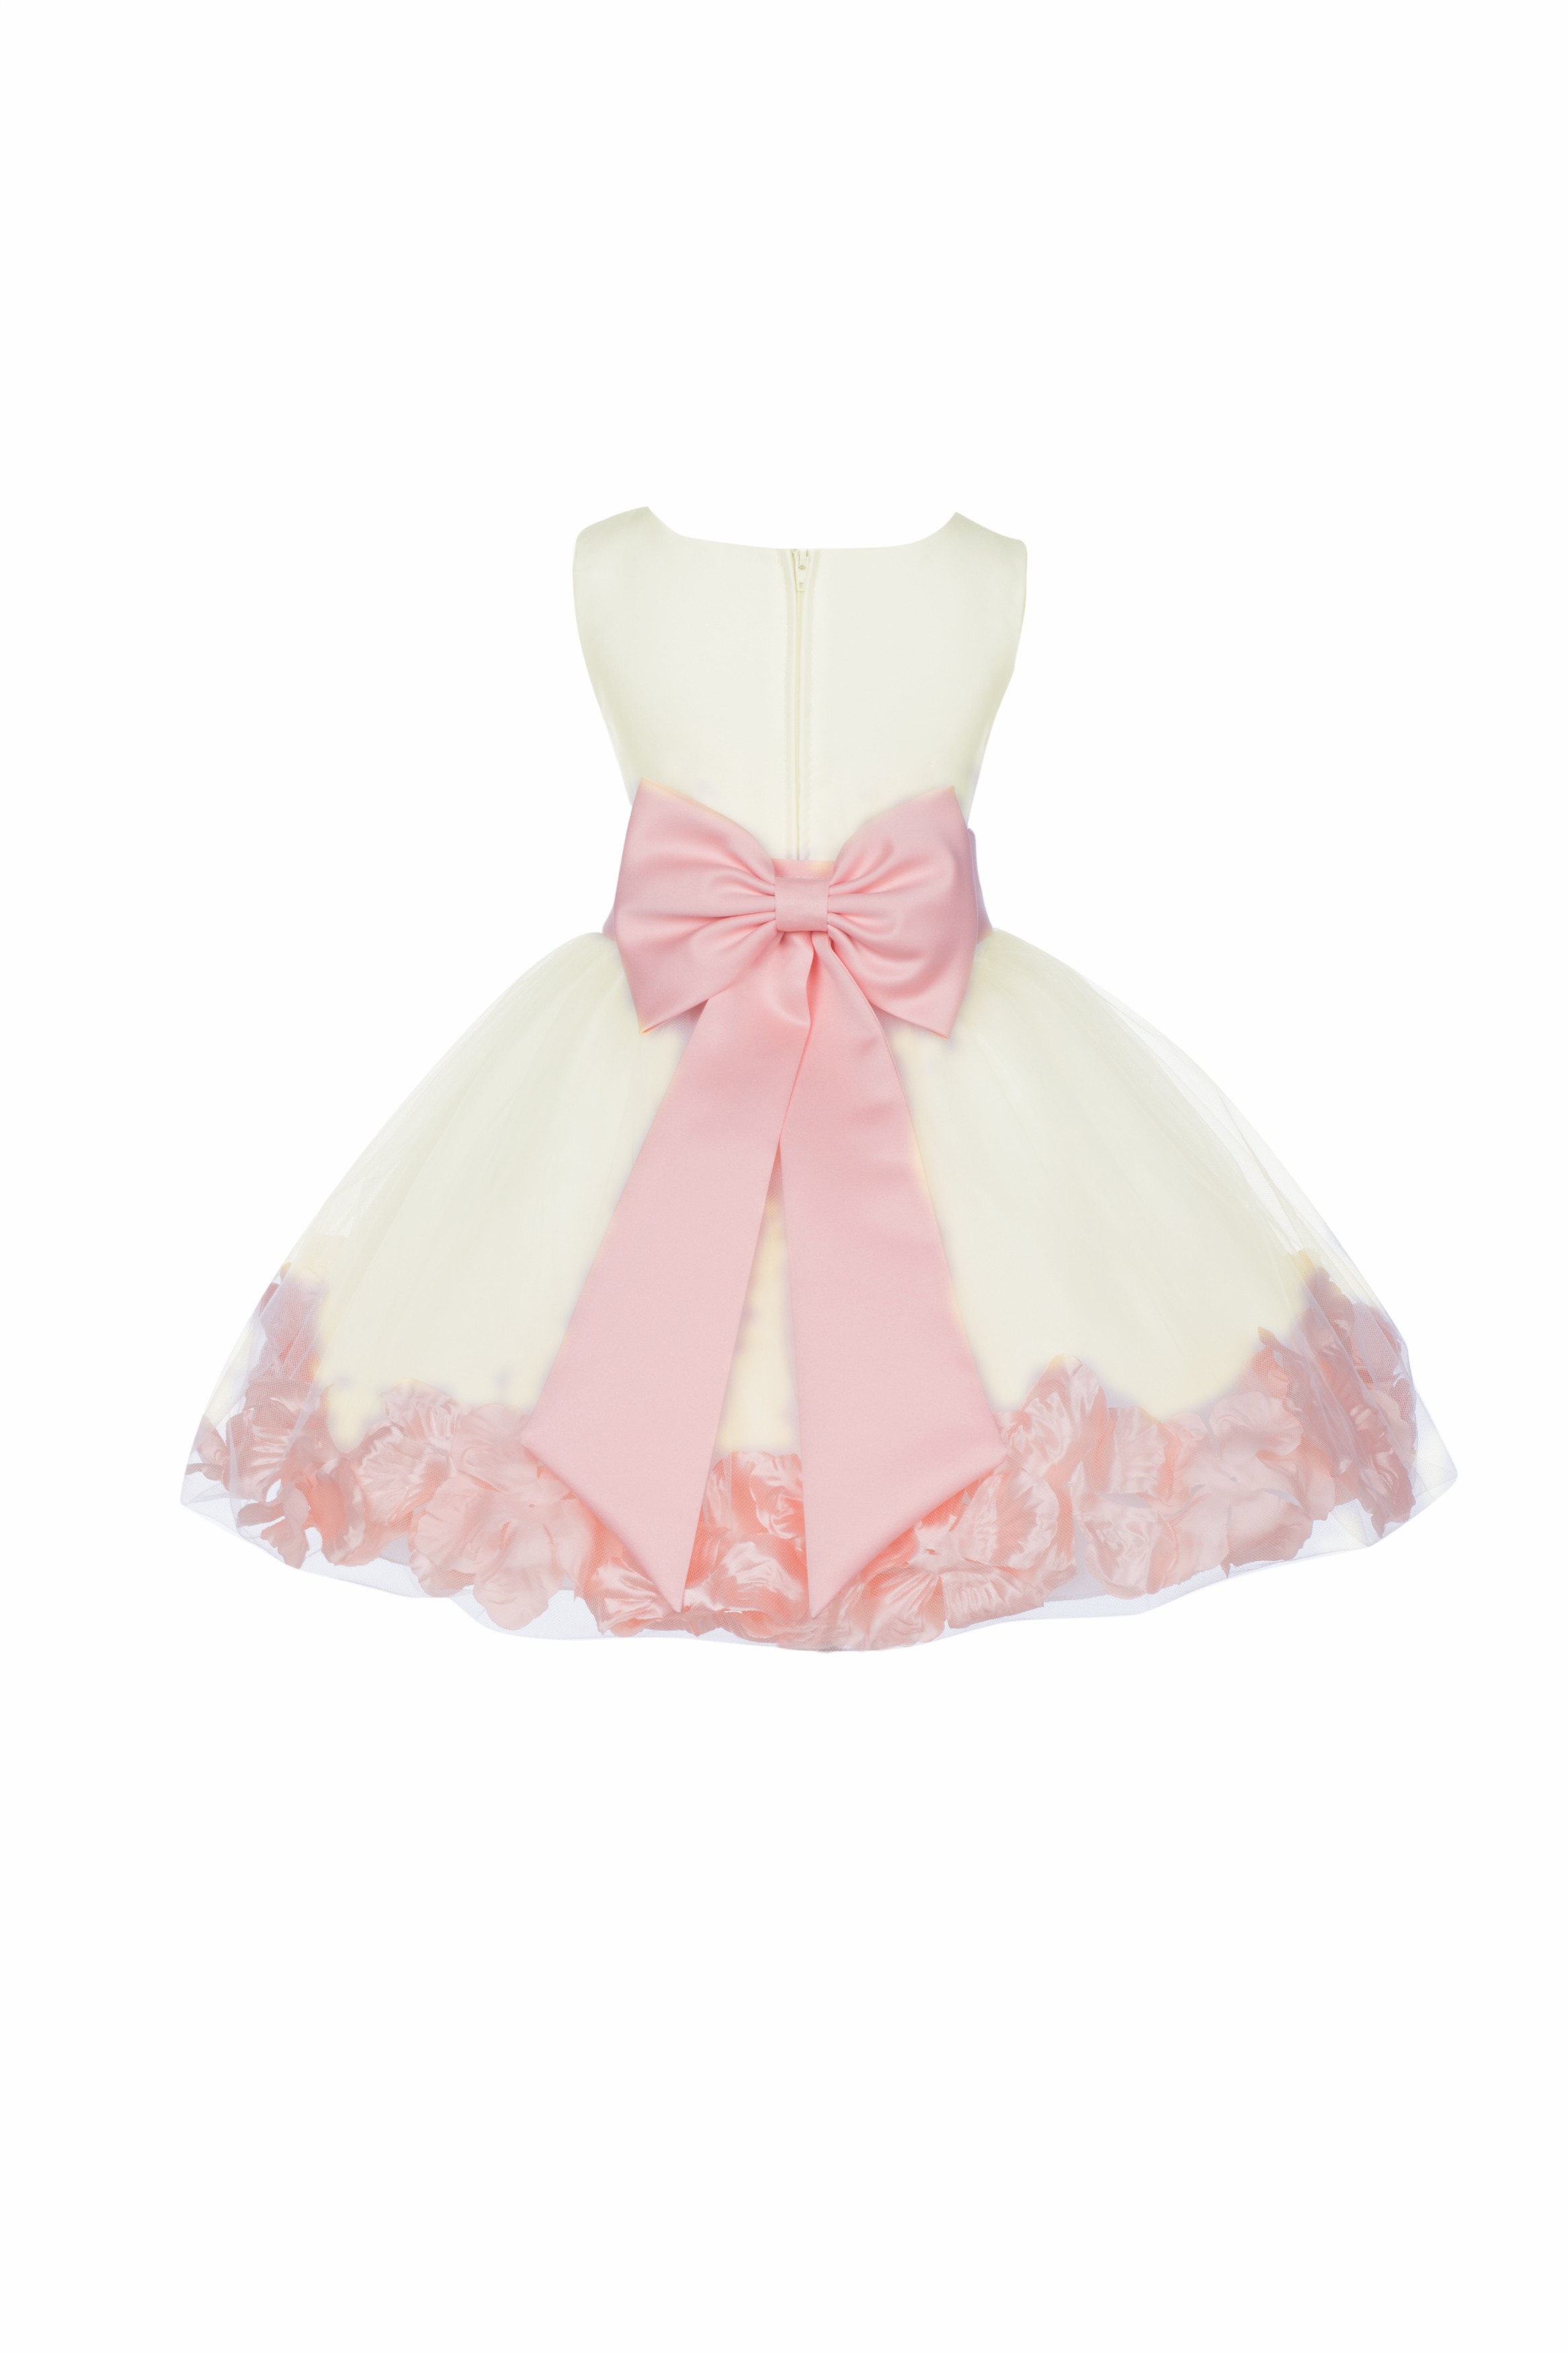 Ivory/Peach Rose Petals Tulle Flower Girl Dress Pageant 305T